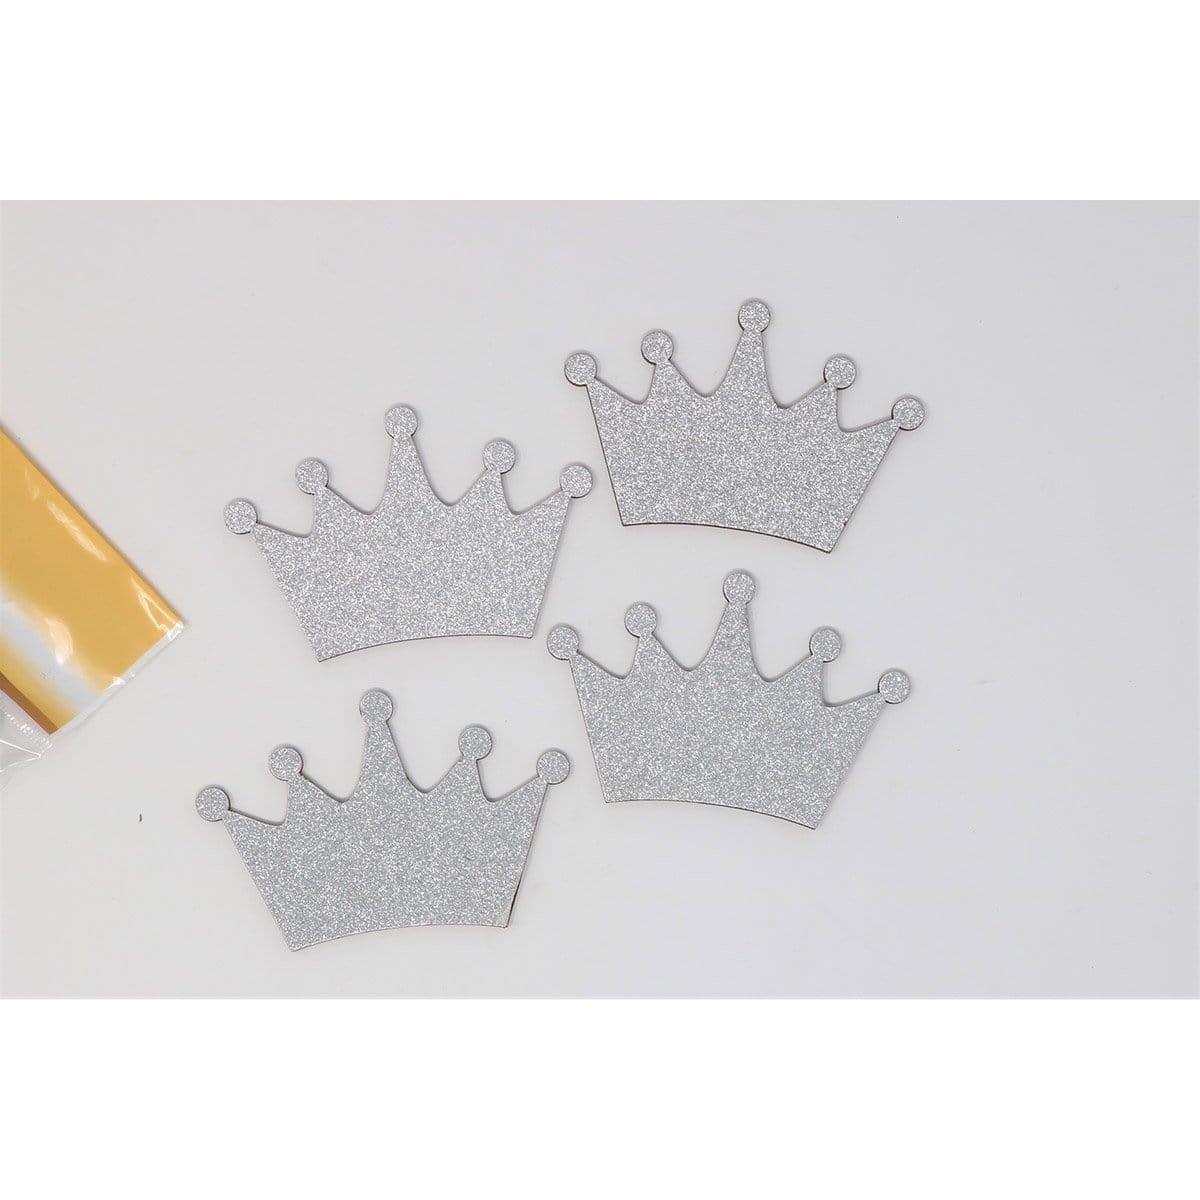 Buy Baby Shower Silver glitter crown embellishment, 4 per package sold at Party Expert